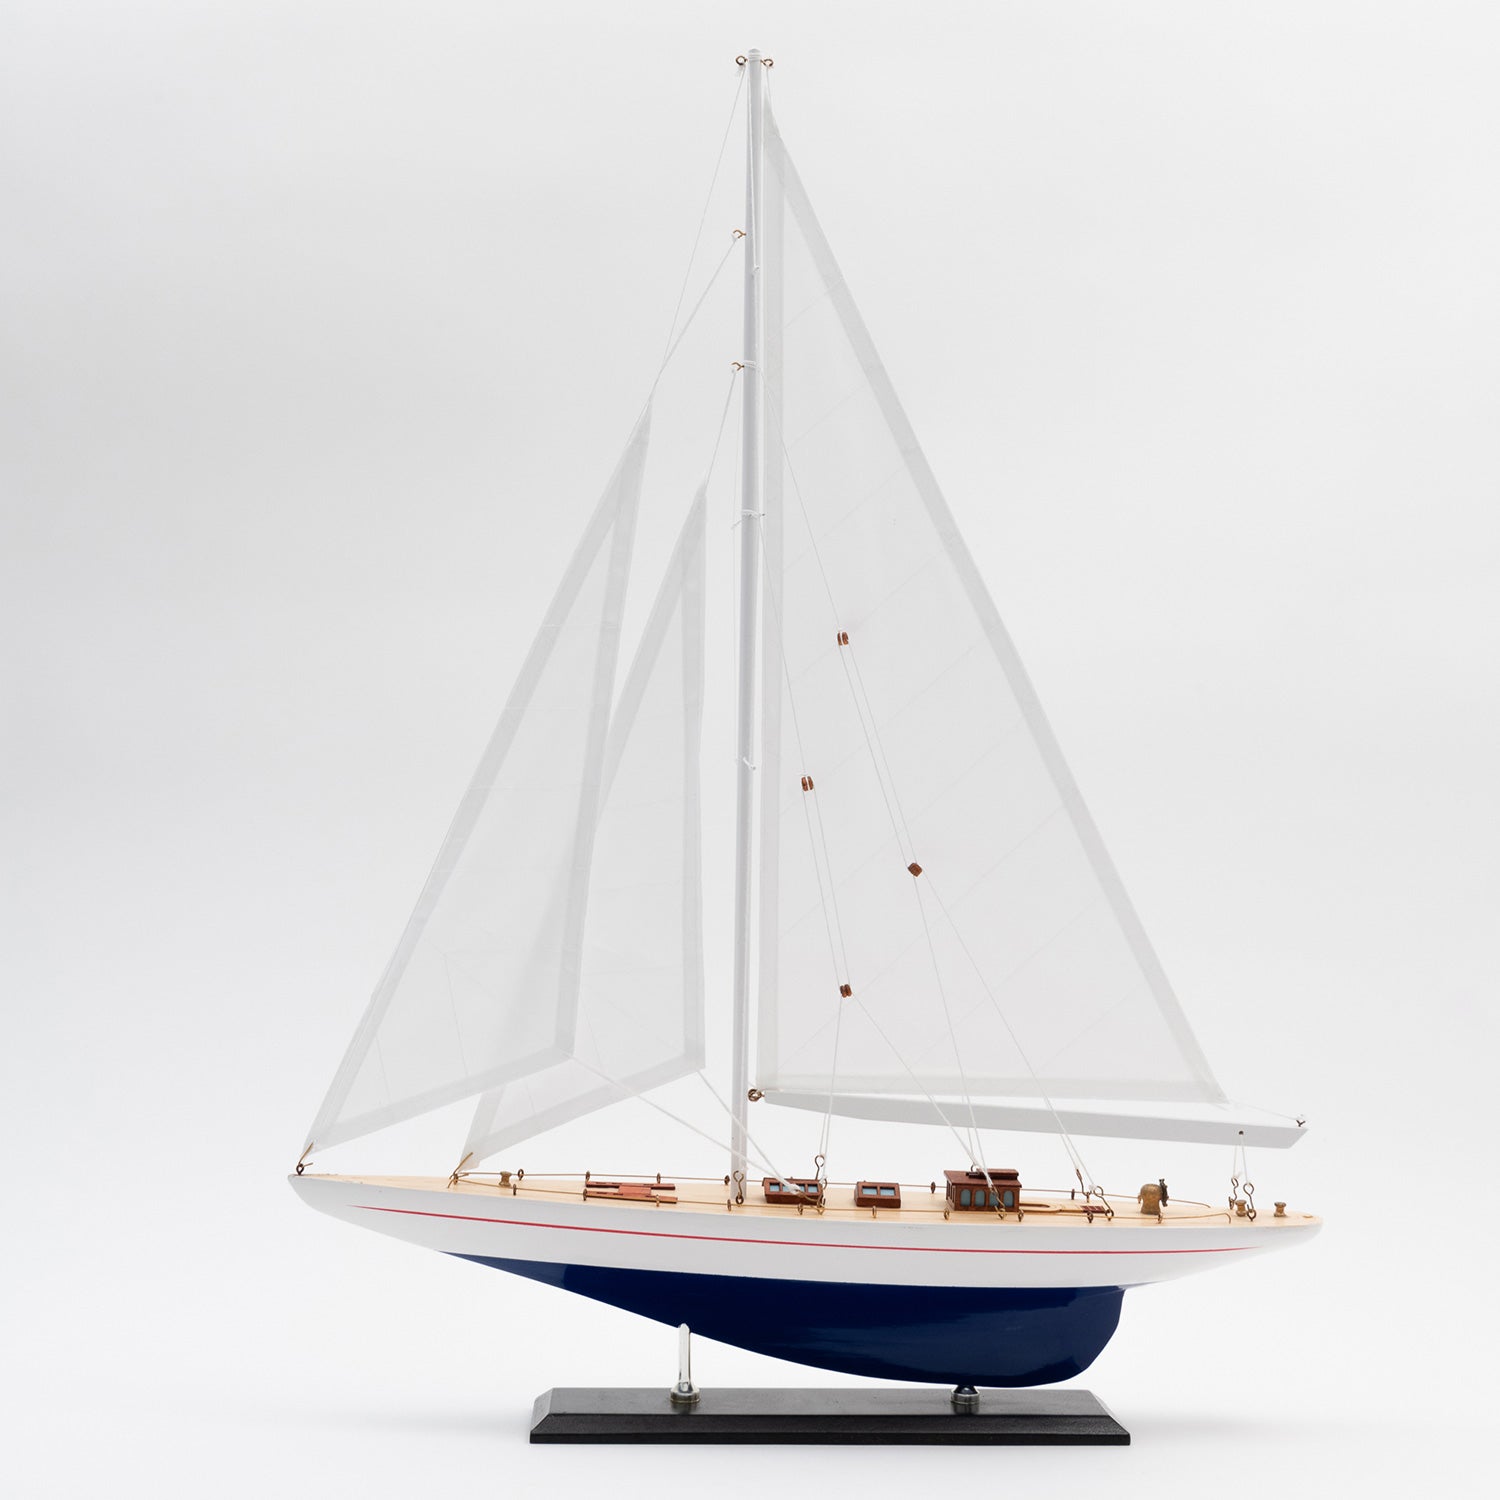 Full side view of the Model J Class Yacht with white sails and a blue and white hull.